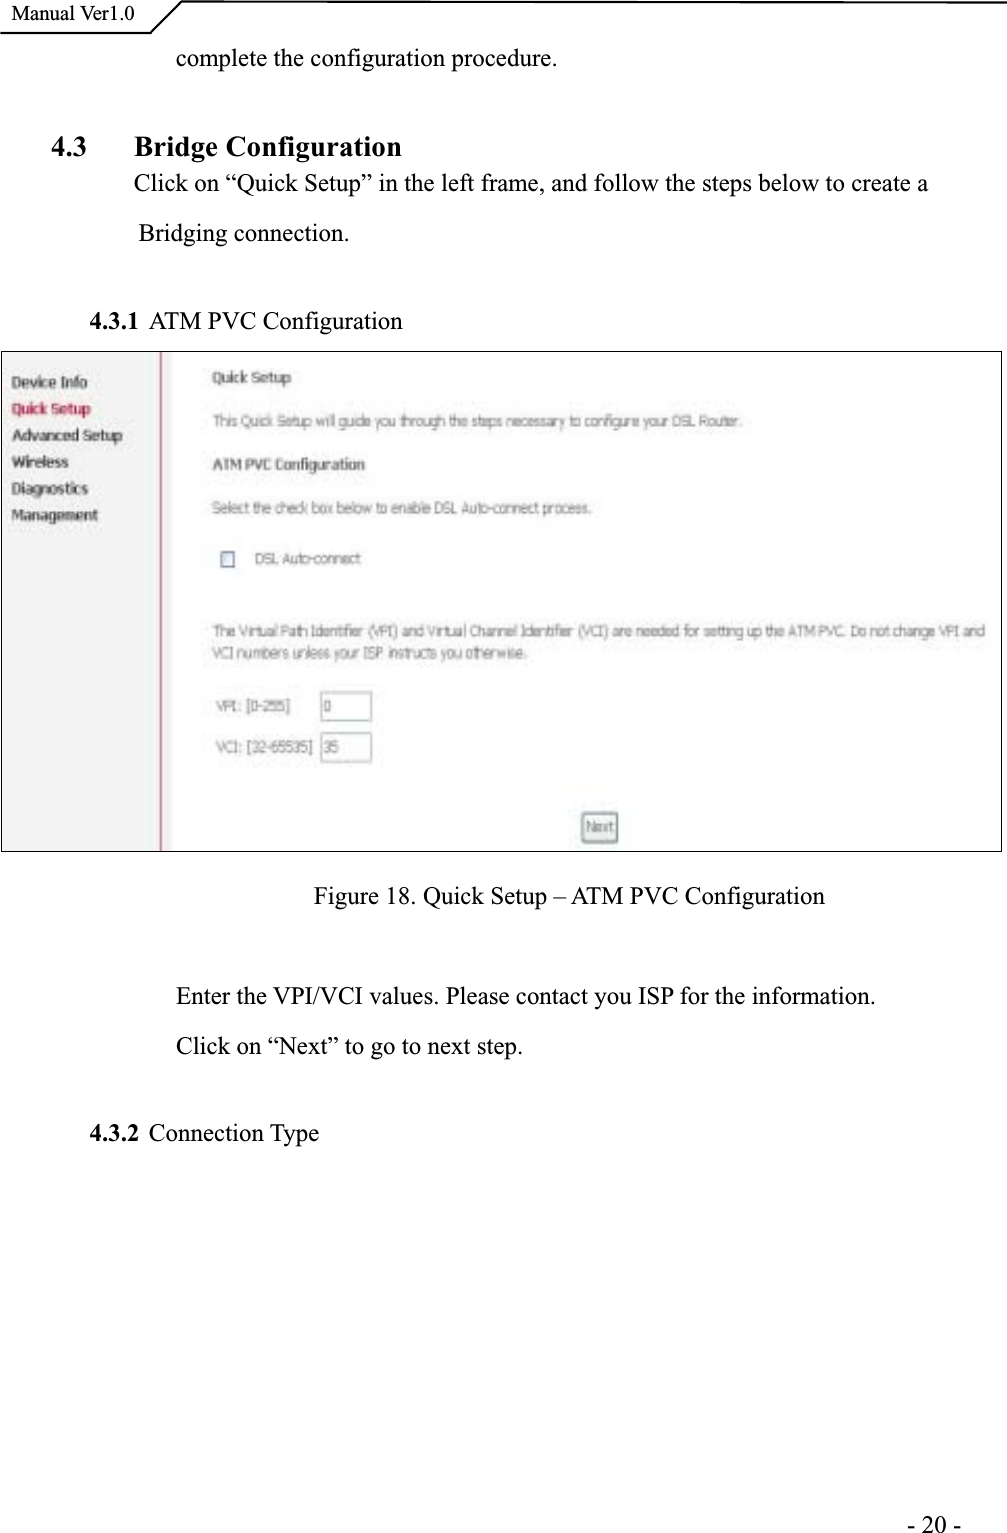  Manual Ver1.0complete the configuration procedure. 4.3 Bridge ConfigurationClick on “Quick Setup” in the left frame, and follow the steps below to create a            Bridging connection.4.3.1 ATM PVC Configuration Figure 18. Quick Setup – ATM PVC Configuration Enter the VPI/VCI values. Please contact you ISP for the information.Click on “Next” to go to next step. 4.3.2 Connection Type                                                                     -20-